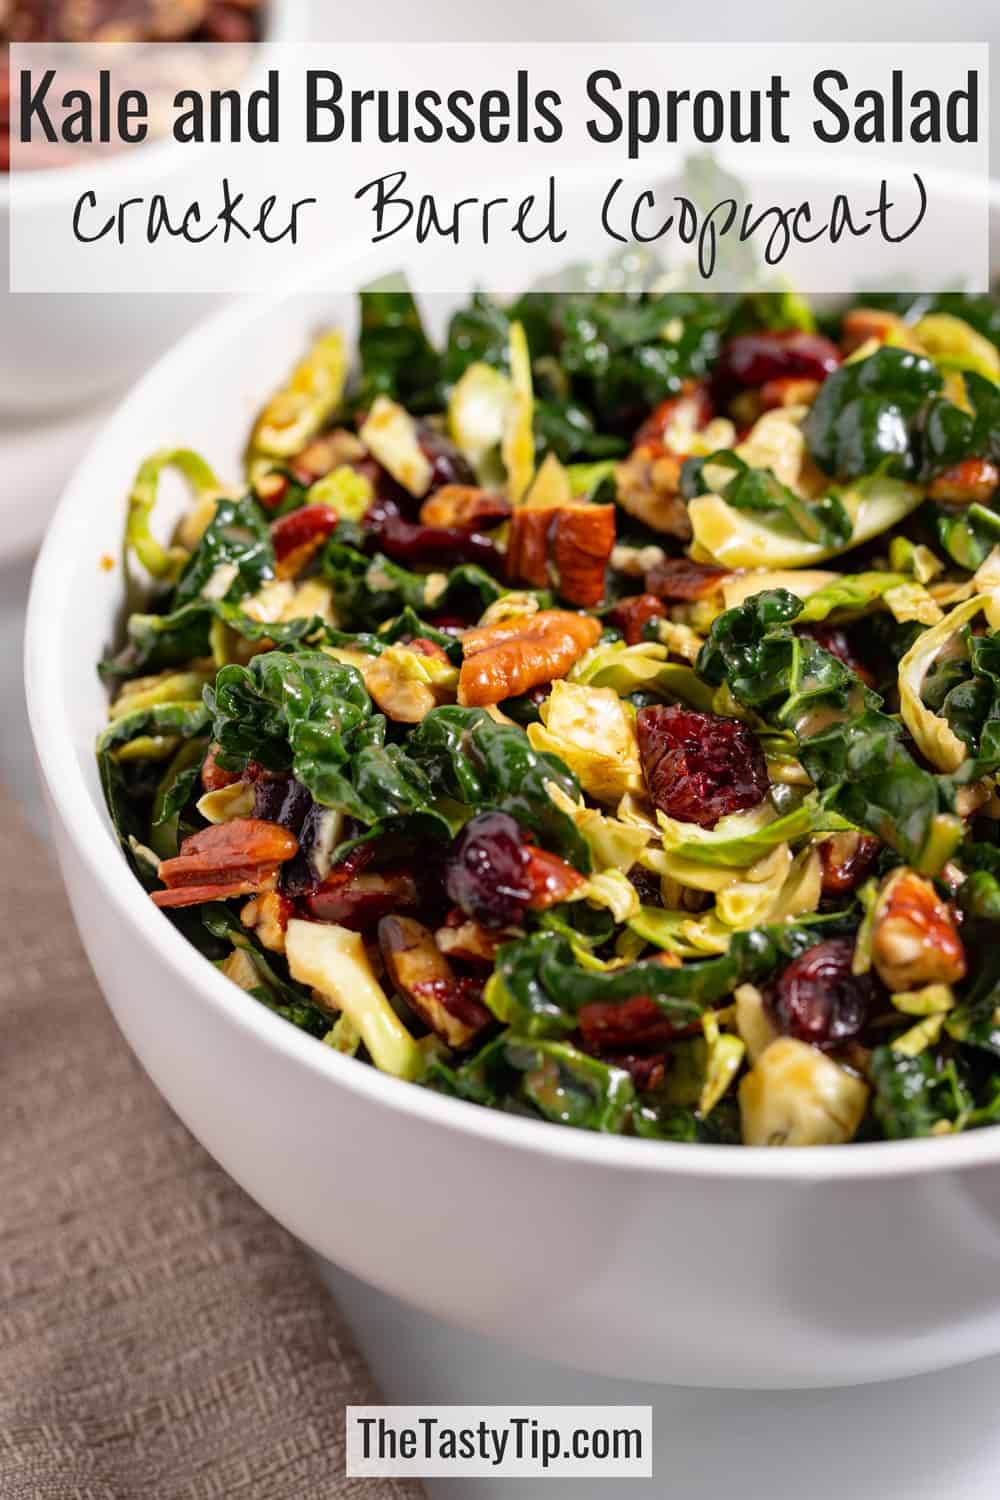 homemade bowl of Cracker Barrel kale and Brussel sprout salad recipe